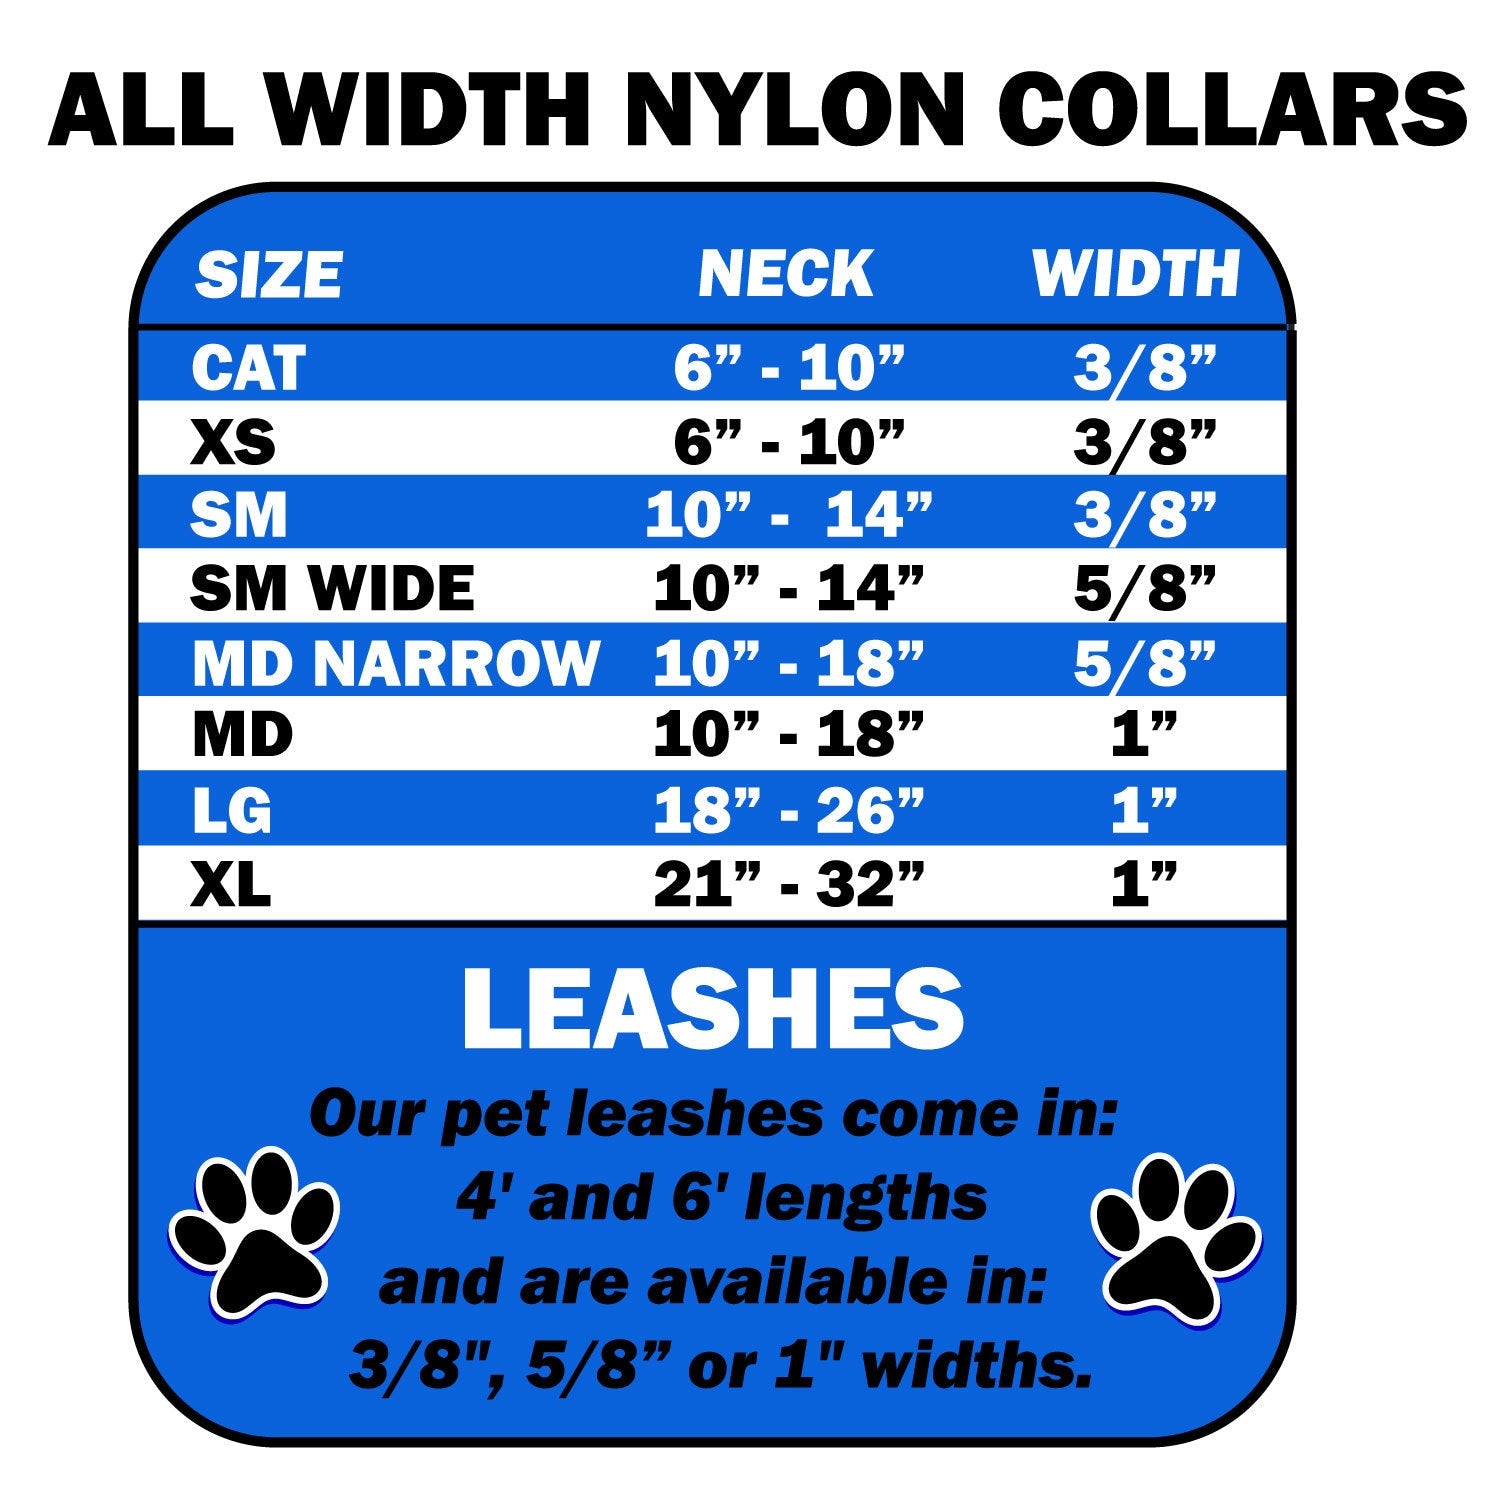 Pet Dog & Cat Nylon Collar or Leash, "Party Monsters"